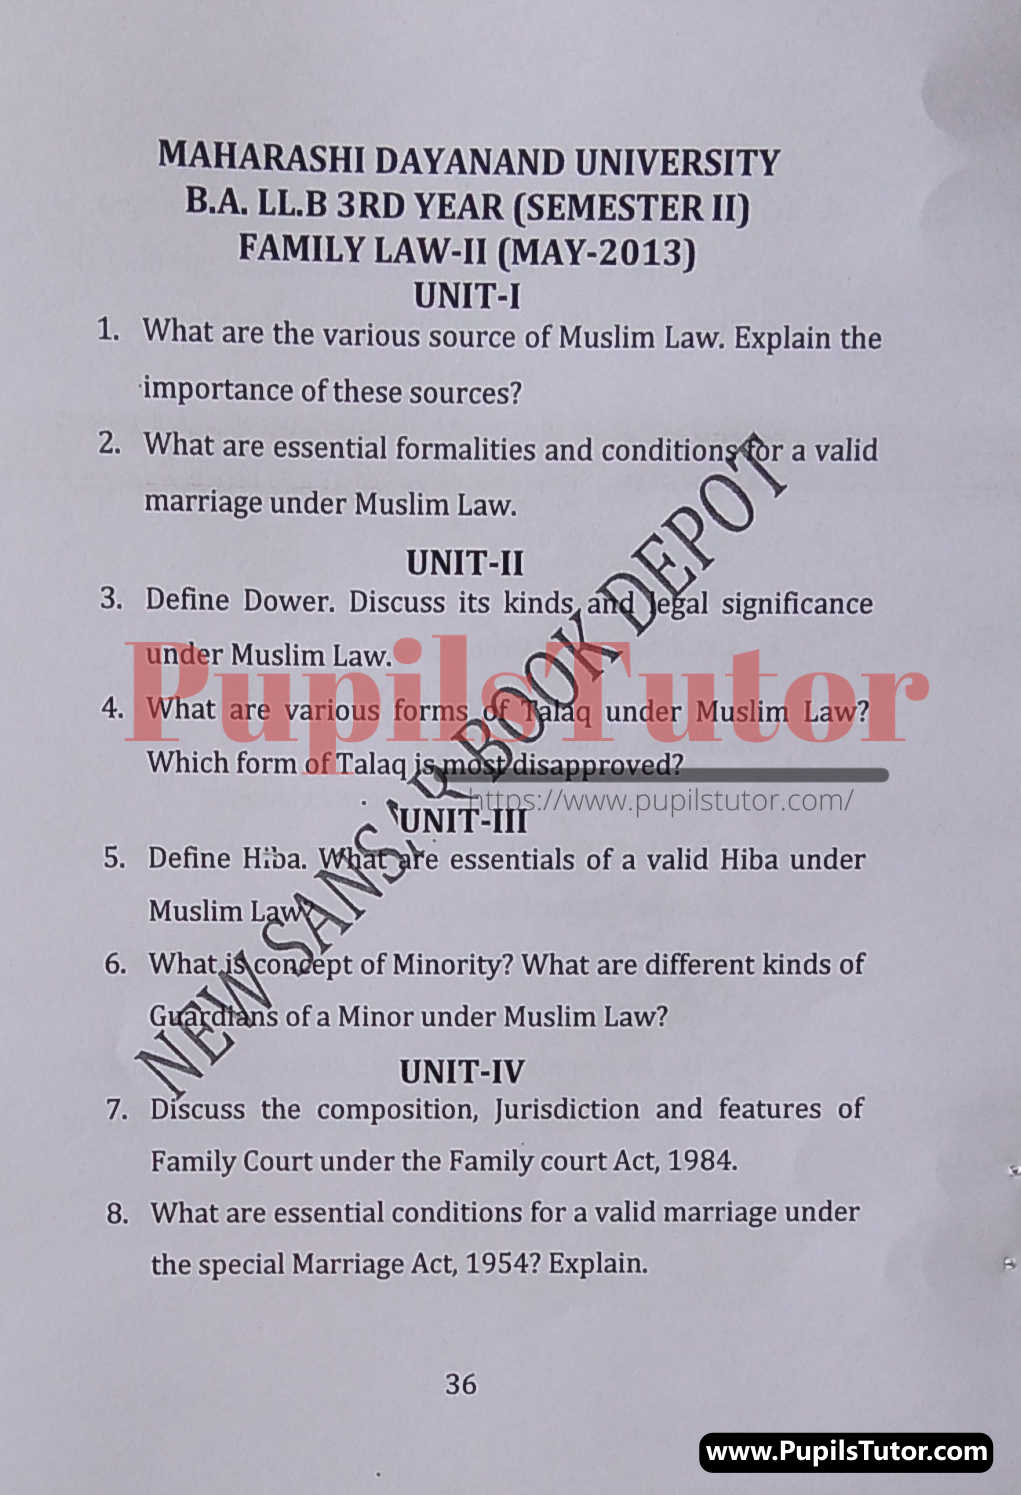 MDU (Maharshi Dayanand University, Rohtak Haryana) LLB Regular Exam (Hons.) Second Semester Previous Year Family Law - II Question Paper For May, 2013 Exam (Question Paper Page 1) - pupilstutor.com